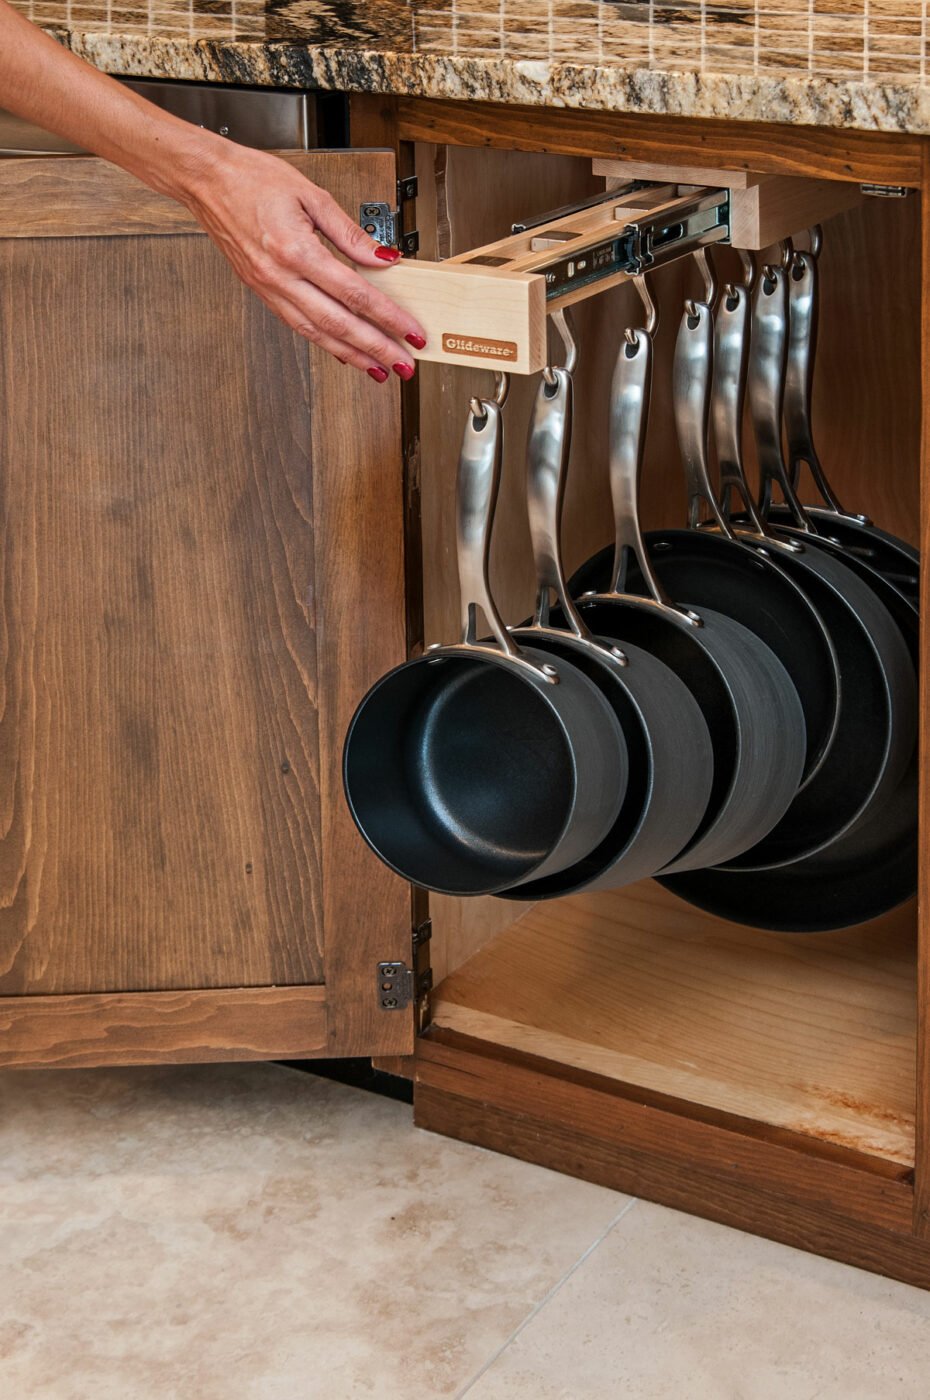 Install a Gliding Rack With Hooks For Pots and Pans